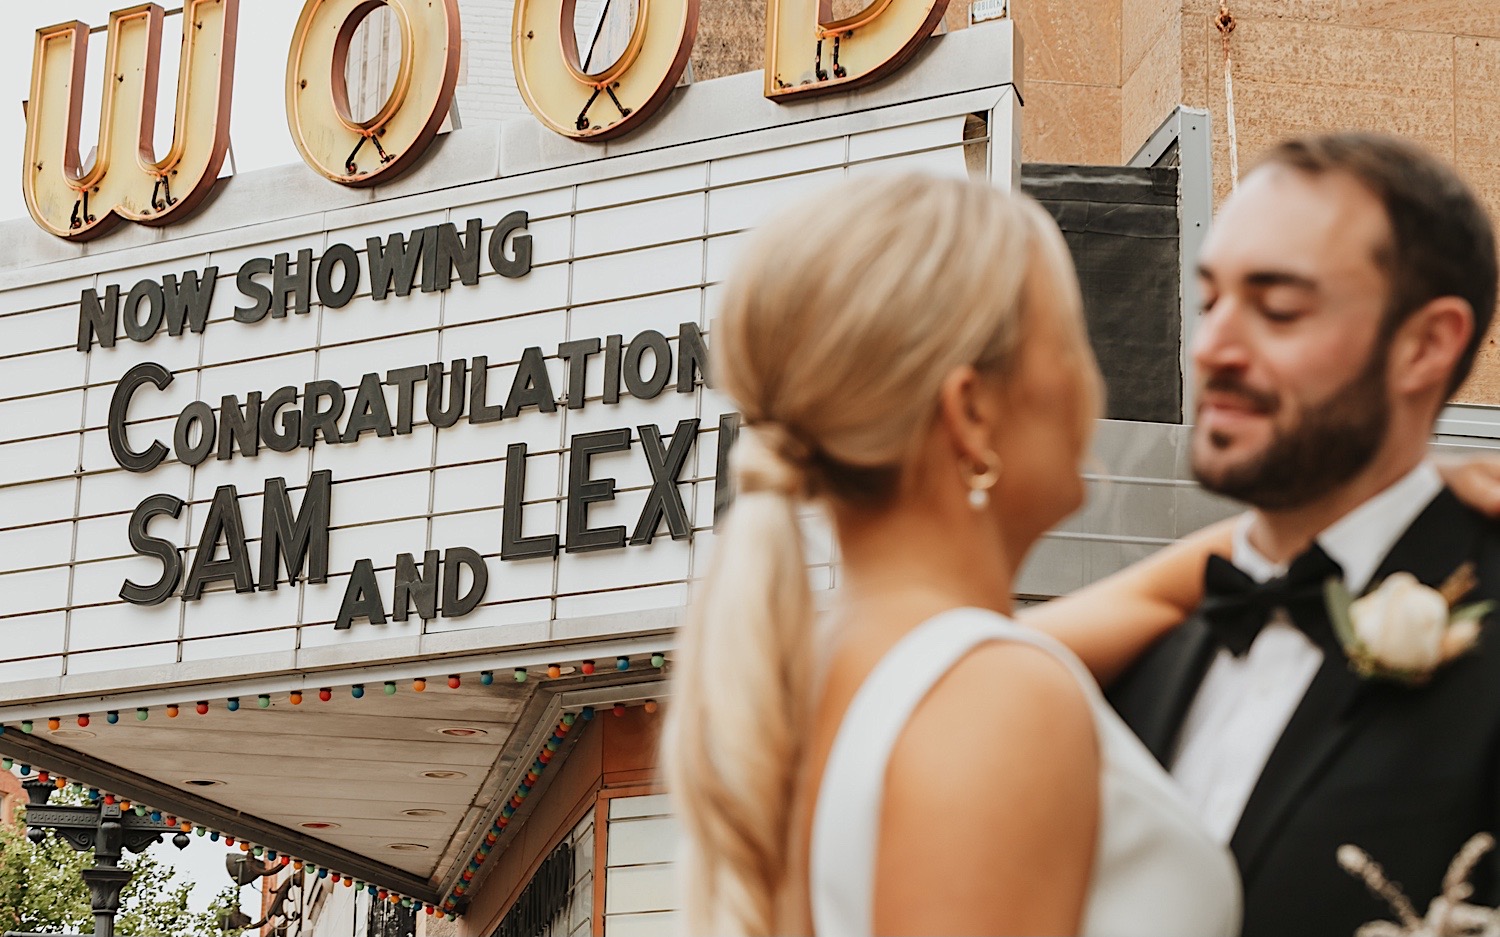 Close up photo of a bride and groom looking at one another, a movie theater is behind them with a sign saying "Now Showing Congratulations Sam and Lexi"